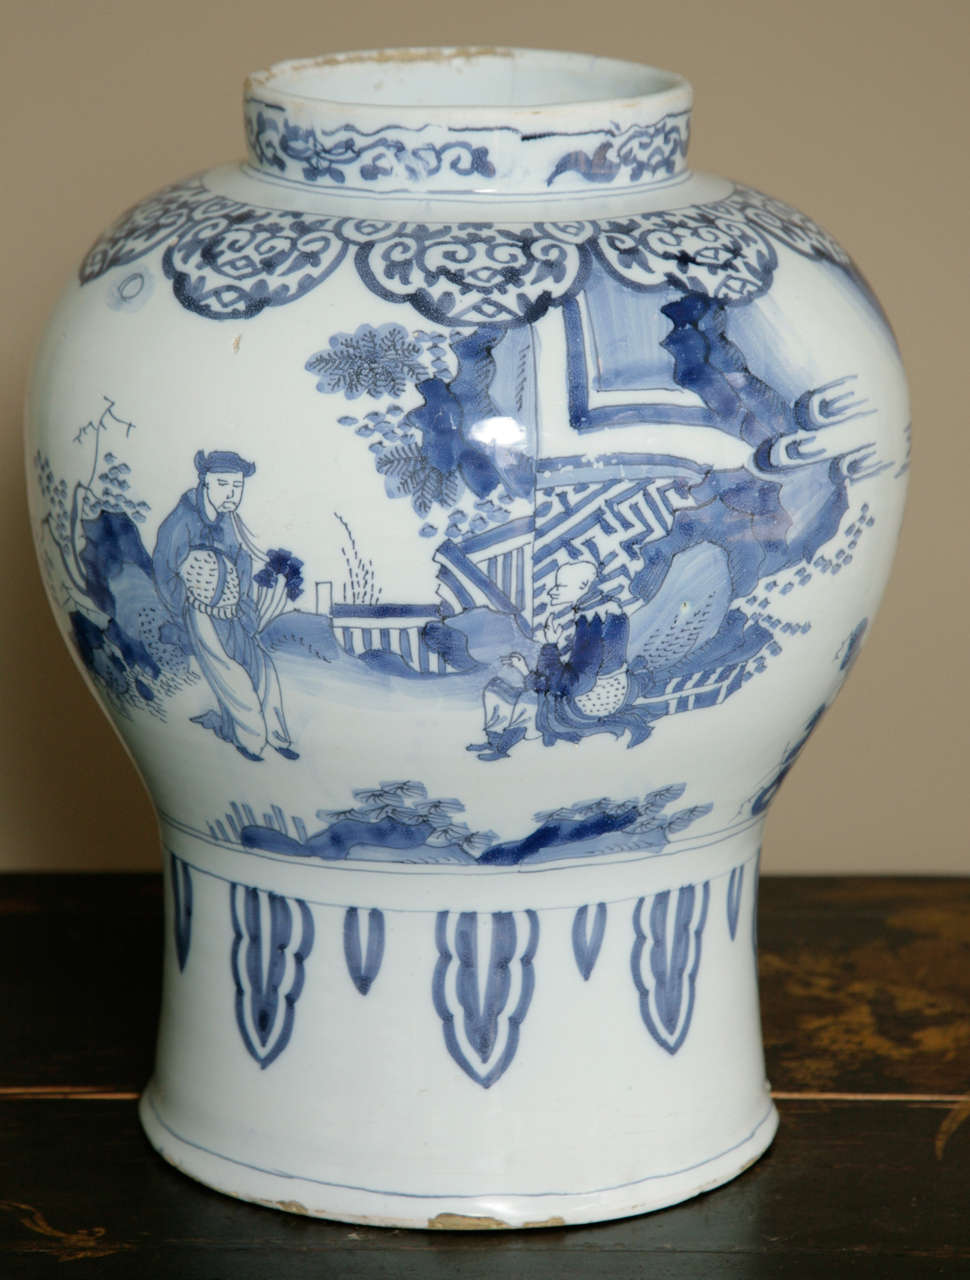 Large Dutch delft baluster vase, circa 1680, decorated in the Chinese transitional style with figurative scenes of scholars and officials with an attendant in a landscape of rockwork and trees, beneath a border of lappets, all above a border at the